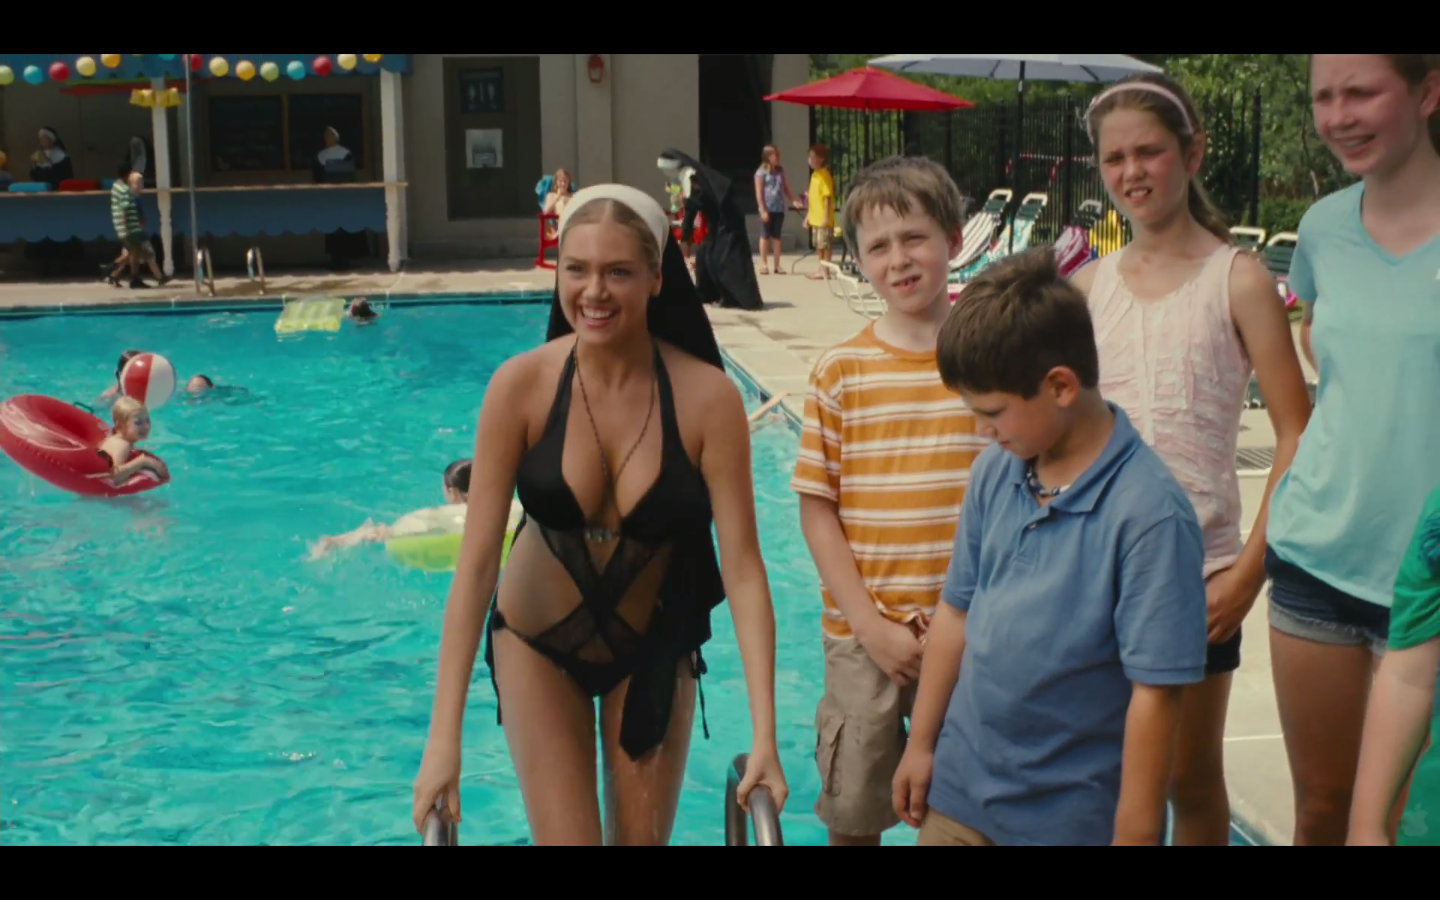 The Stooges Looks Terrible, But Holy Sh*t Kate Upton As A Nun –